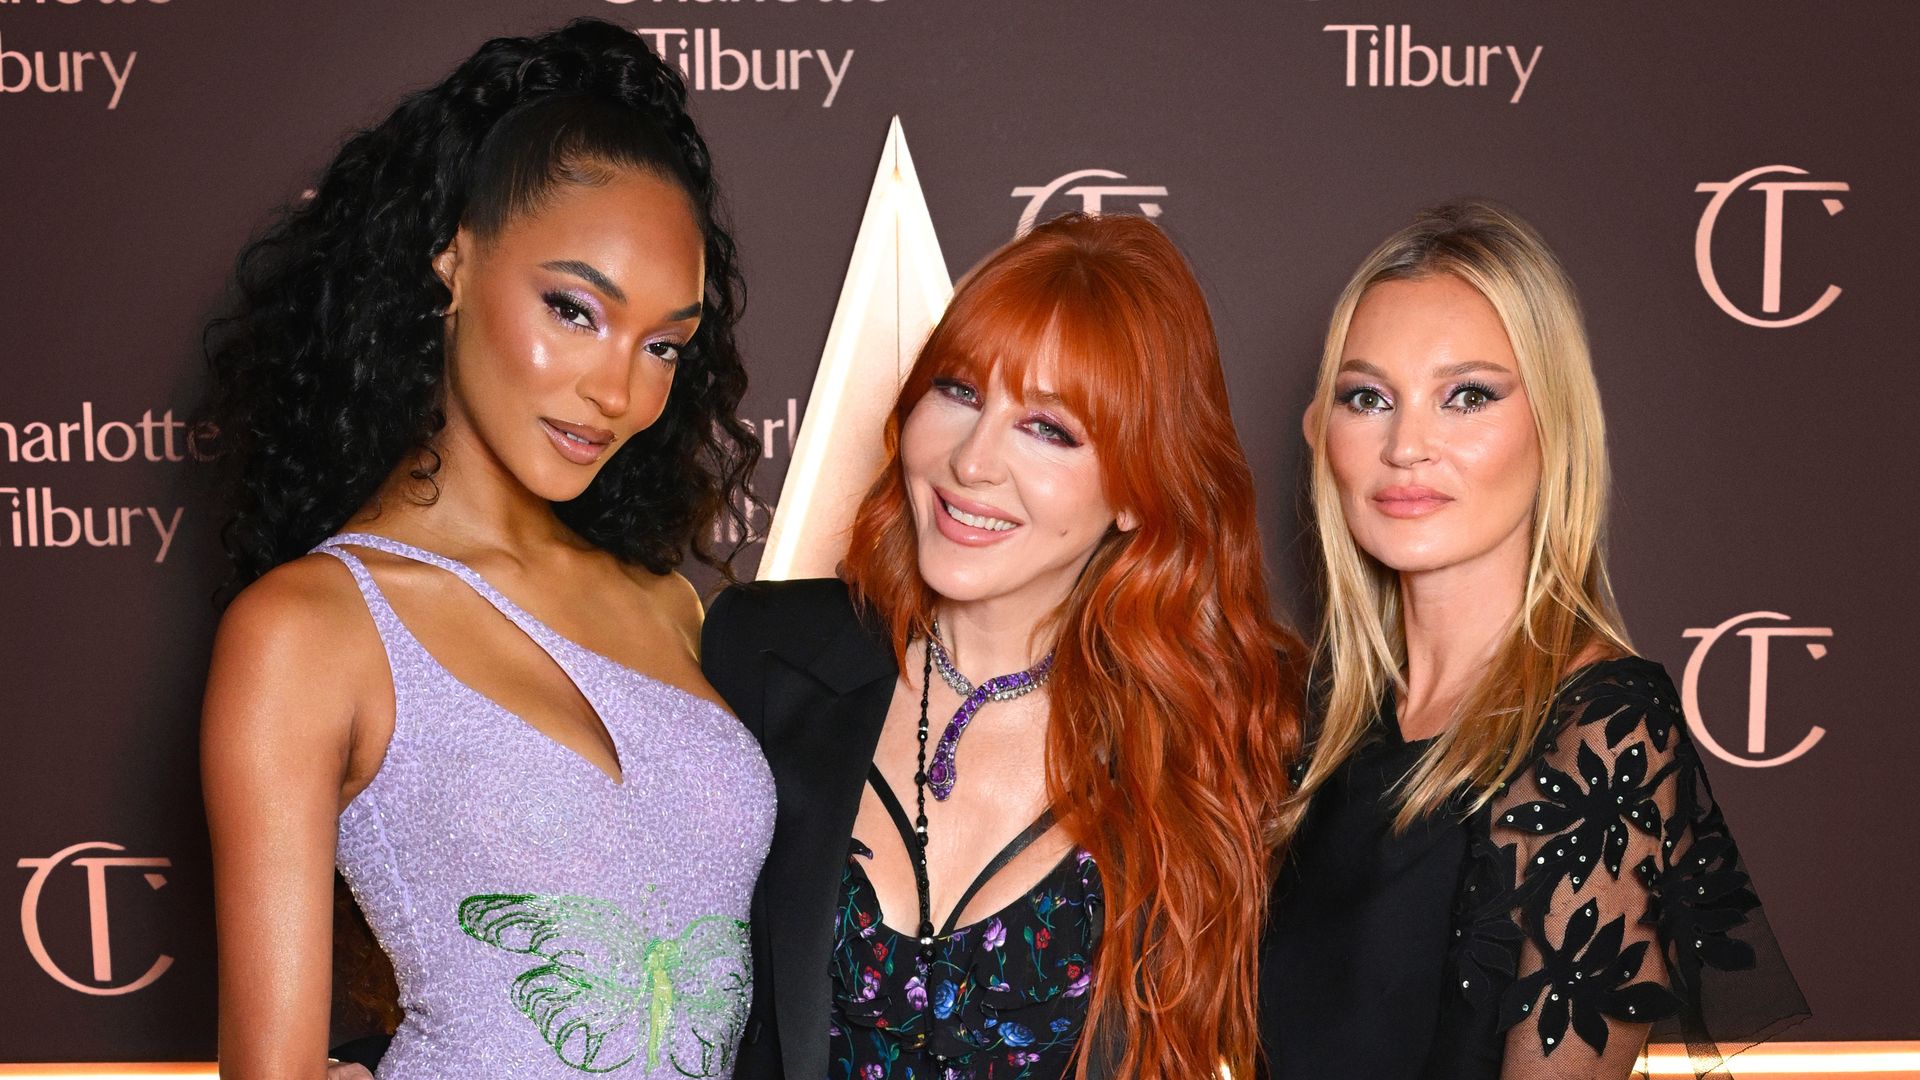 PARIS, FRANCE - OCTOBER 04: Jourdan Dunn, Charlotte Tilbury and Kate Moss attend the Global unveiling of Charlotte Tilbury's Holiday Campaign at Club Magic on October 04, 2023 in Paris, France. (Photo by Kristy Sparow/Getty Images for Charlotte Tilbury)